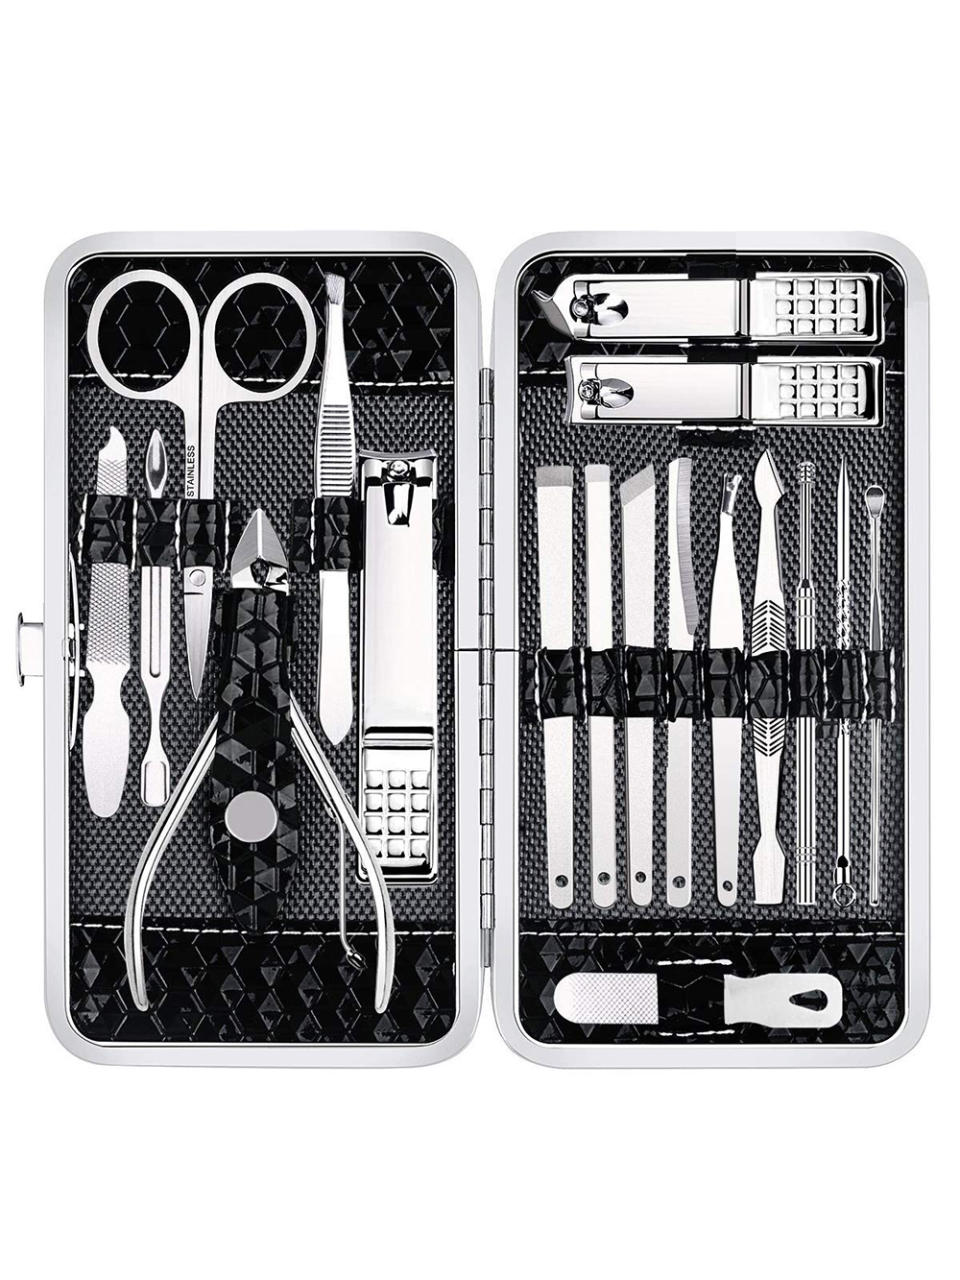 Yougai 18-Piece Stainless Steel Manicure Kit